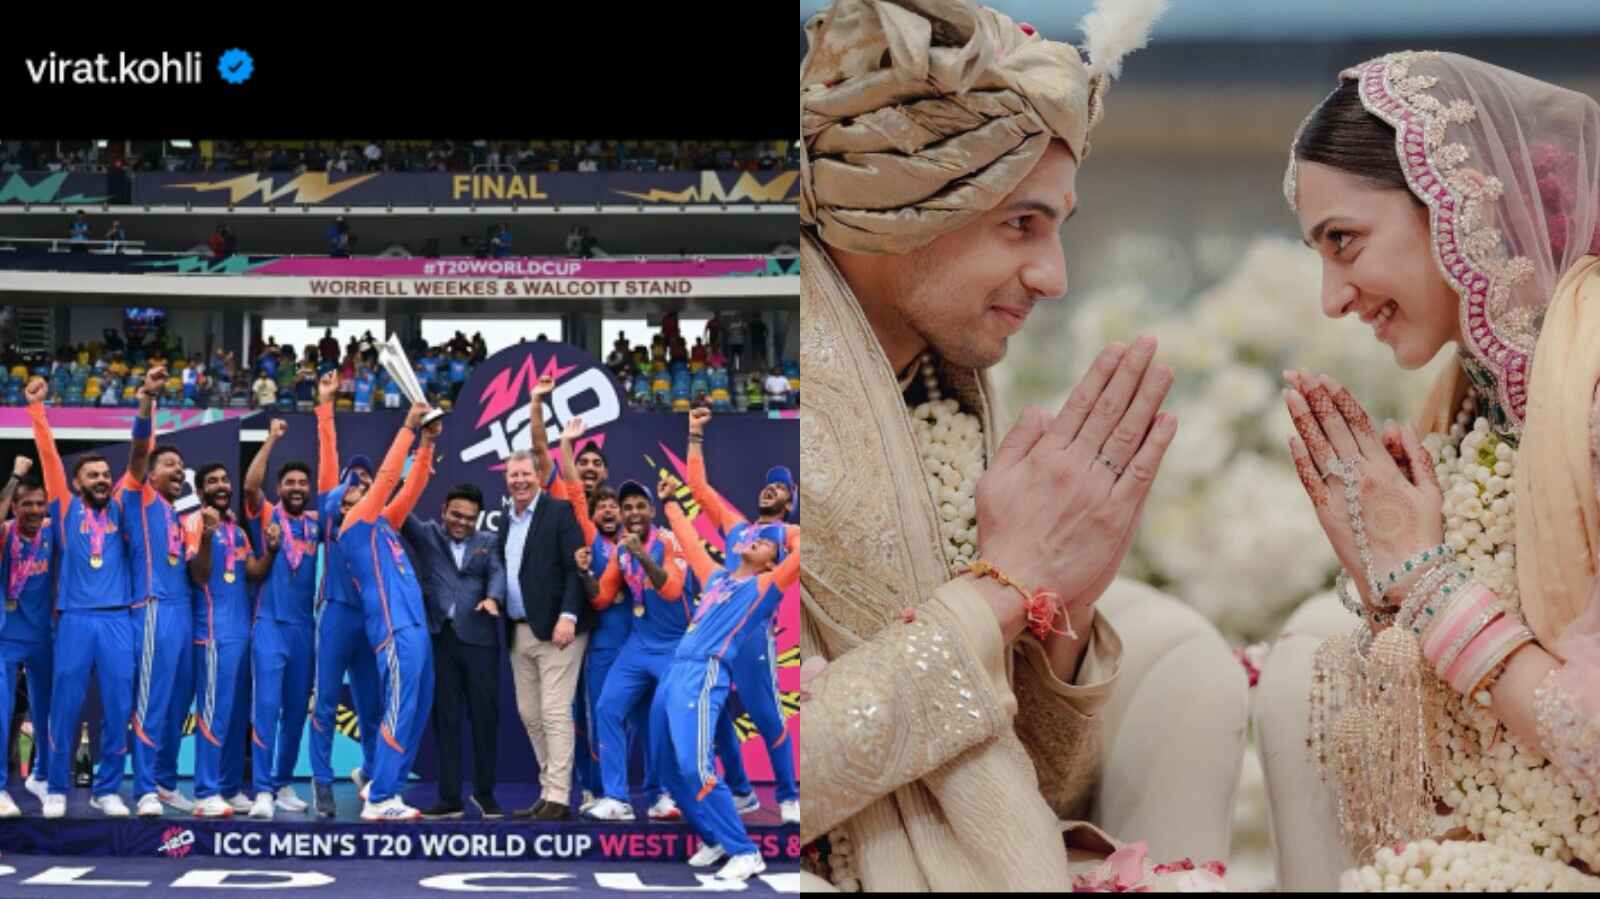 Virat Kohli's World Cup win post beats Sidharth-Kiara's wedding  announcement to become the most-liked post on Instagram | IWMBuzz